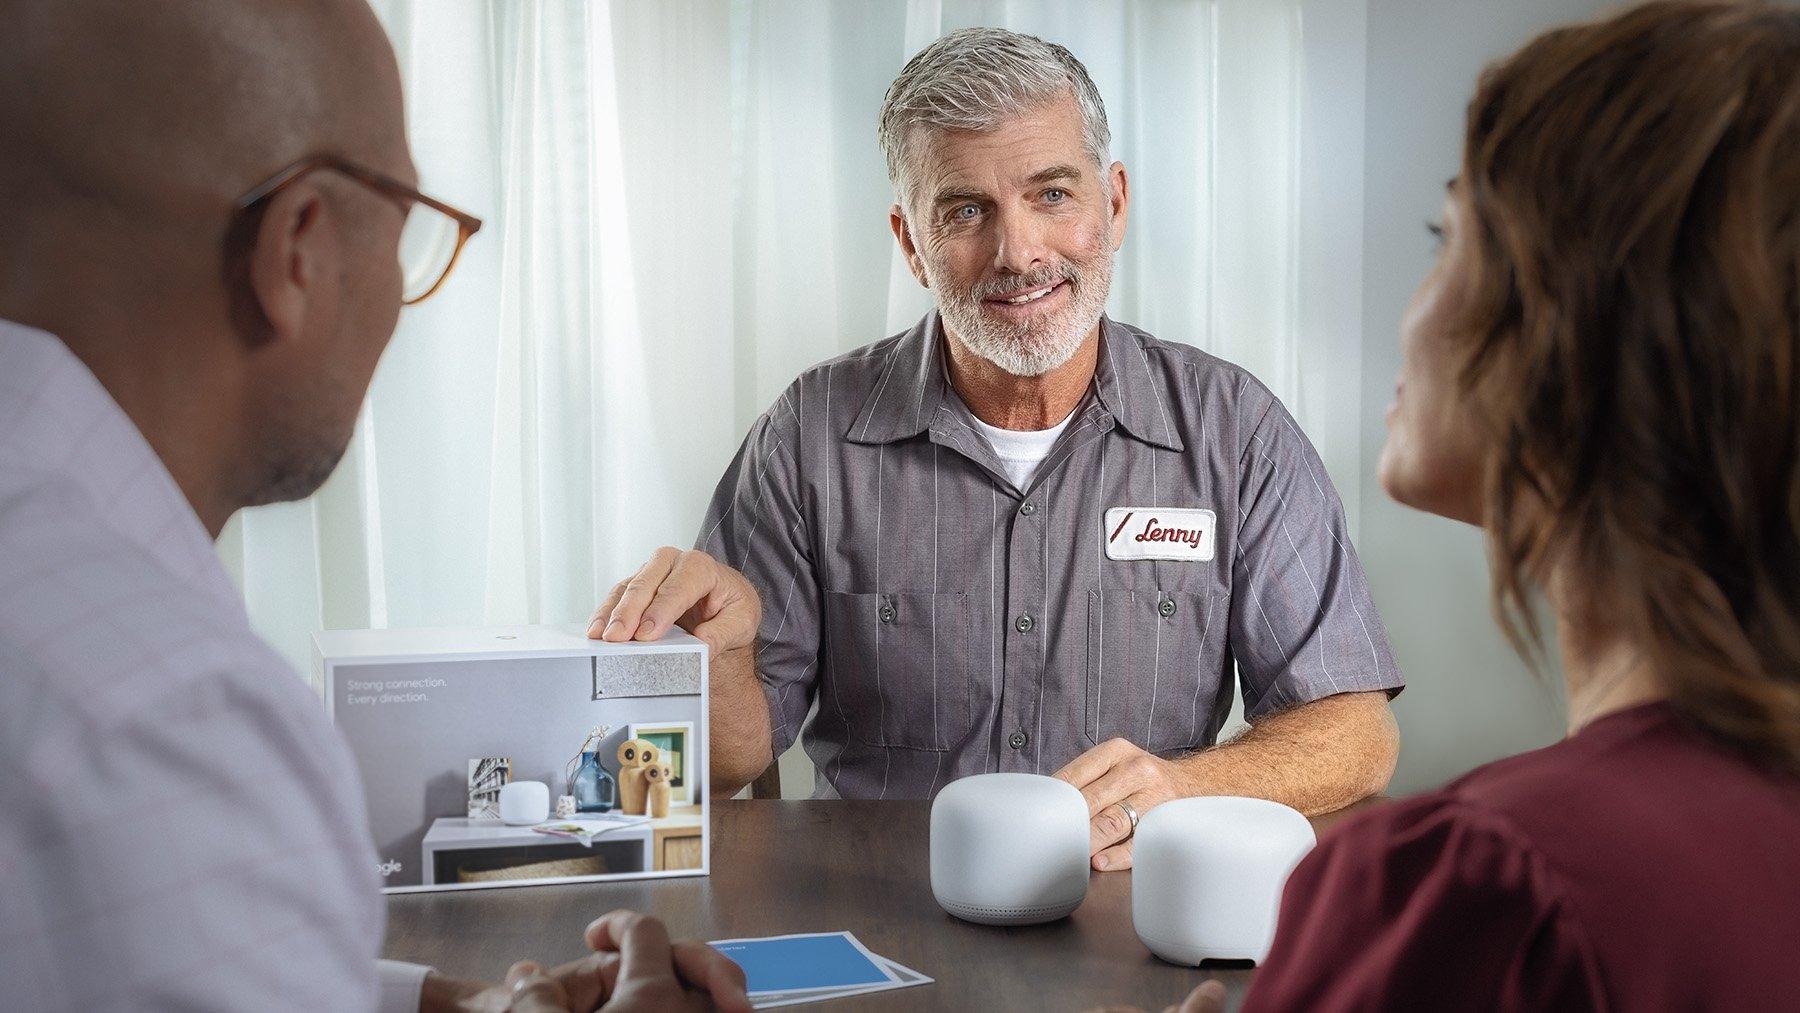 An HVAC technician discusses smart home products with homeowners at a dining room table.